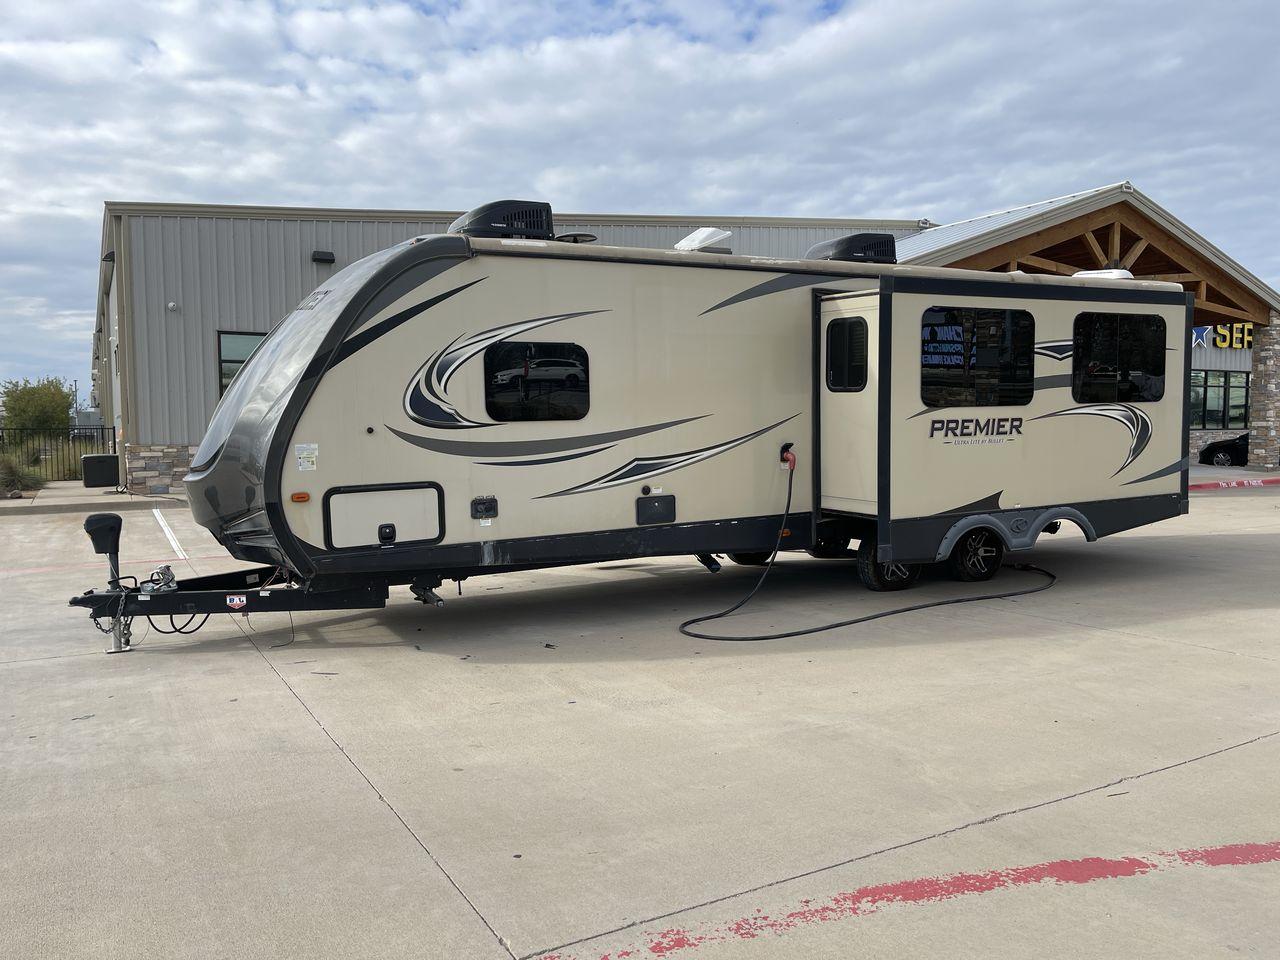 2018 BLACK KEYSTONE PREMIER 30RIPR (4YDT29R22JD) , Length: 35.42 ft. | Dry Weight: 6,675 lbs. | Gross Weight: 8,200 lbs. | Slides: 2 transmission, located at 4319 N Main Street, Cleburne, TX, 76033, (817) 221-0660, 32.435829, -97.384178 - With a length of 35 feet and a dry weight of 6,675 pounds, the 2018 Keystone Premier 30K offers spacious living quarters while remaining lightweight and easy to tow. Inside the Premier 30K, you'll be greeted by a beautifully designed interior that boasts residential-style finishes and upscale amenit - Photo #23